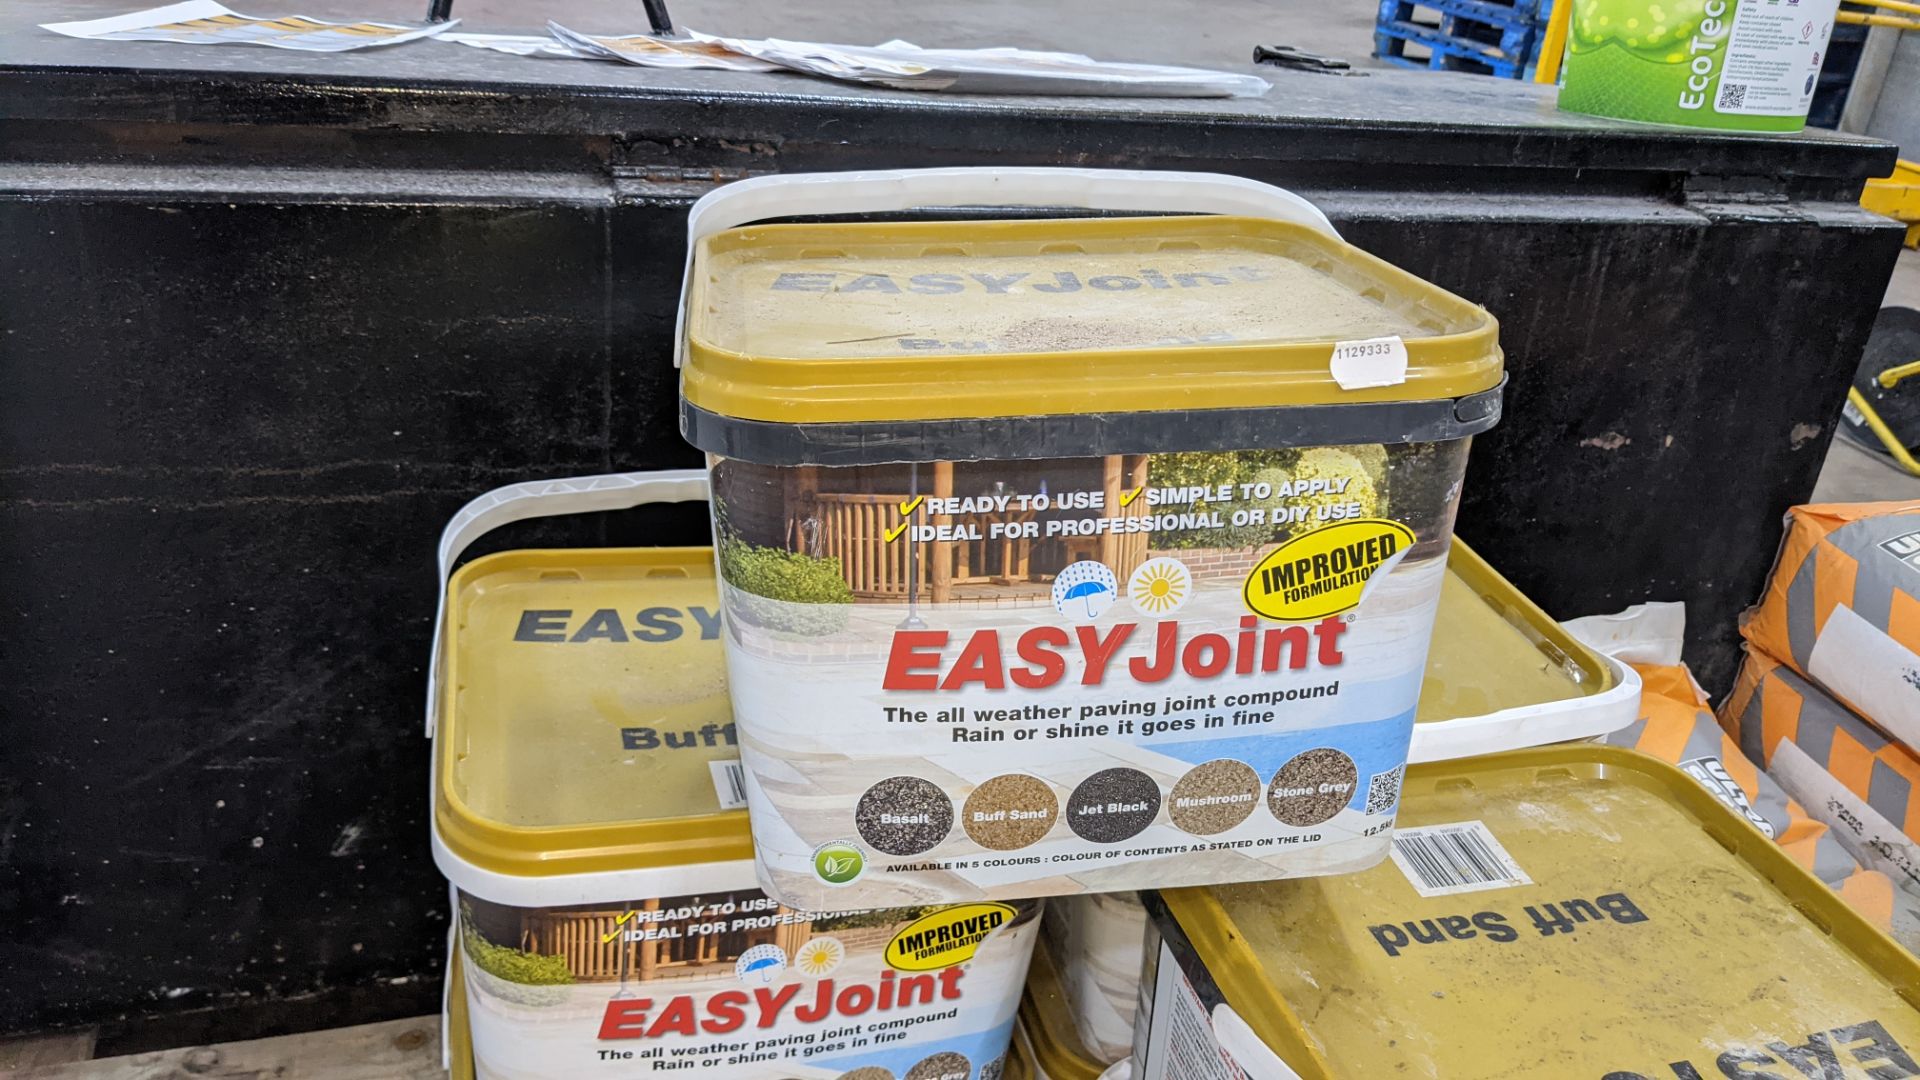 8 off 12.5kg tubs of EASYJoint buff sand all weather paving joint compound - Image 4 of 6